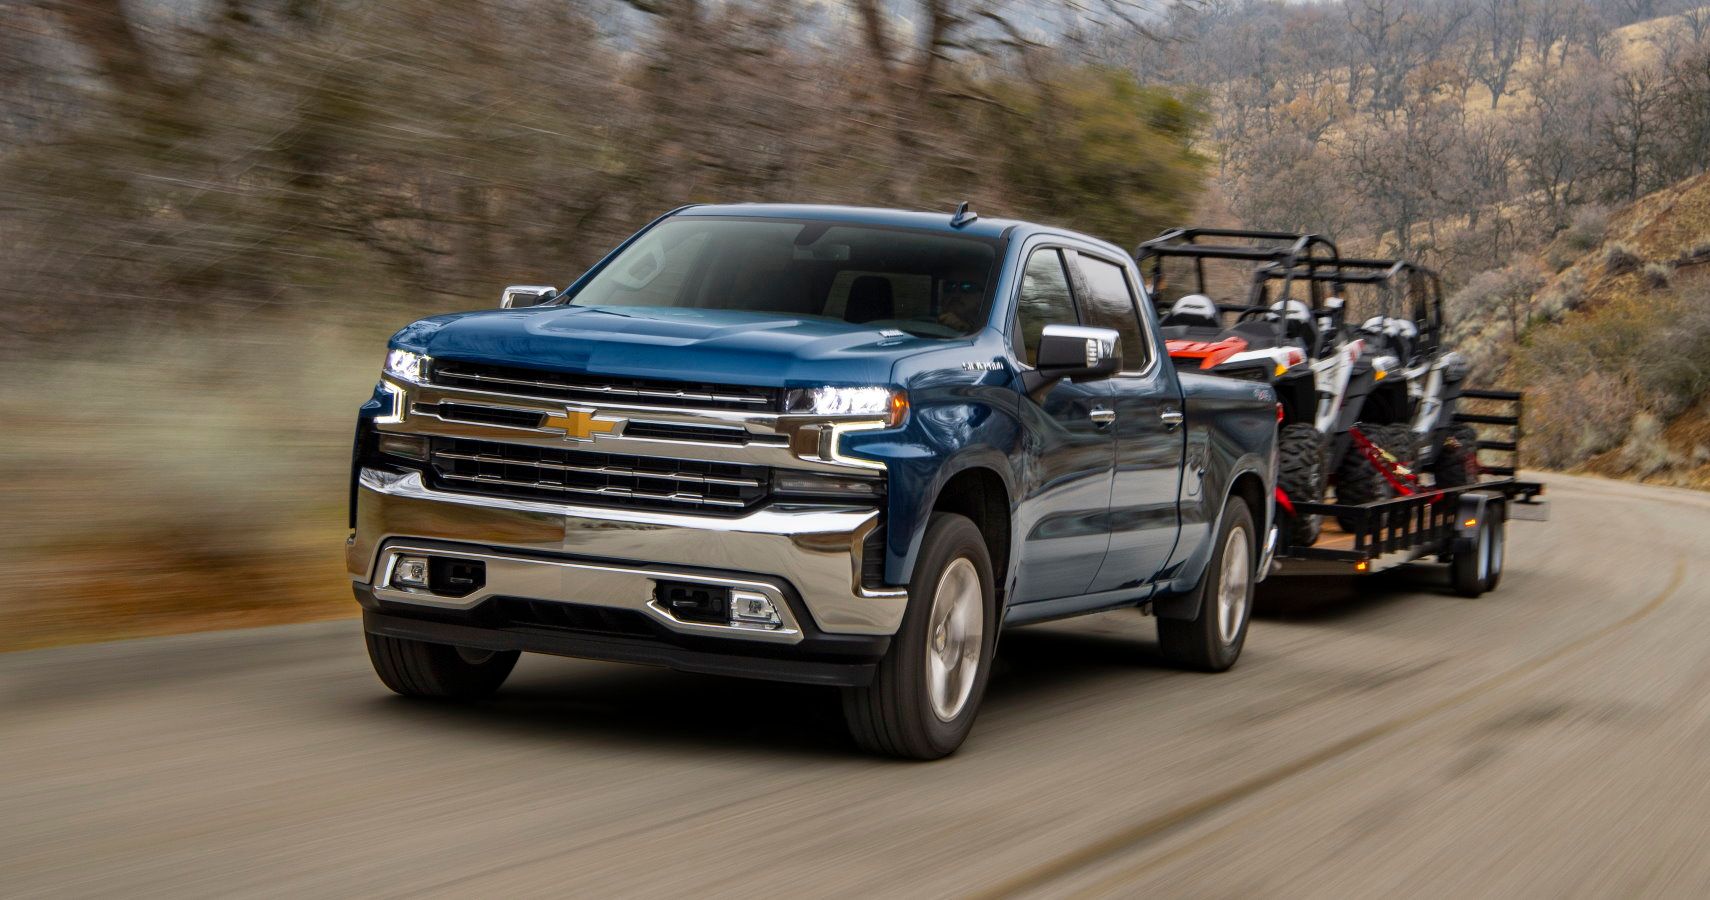 The Chevrolet Silverado???s all-new 3.0L Duramax inline-six turbo-diesel engine offers segment-leading torque and horsepower, in addition to a focus on fuel economy and capability.